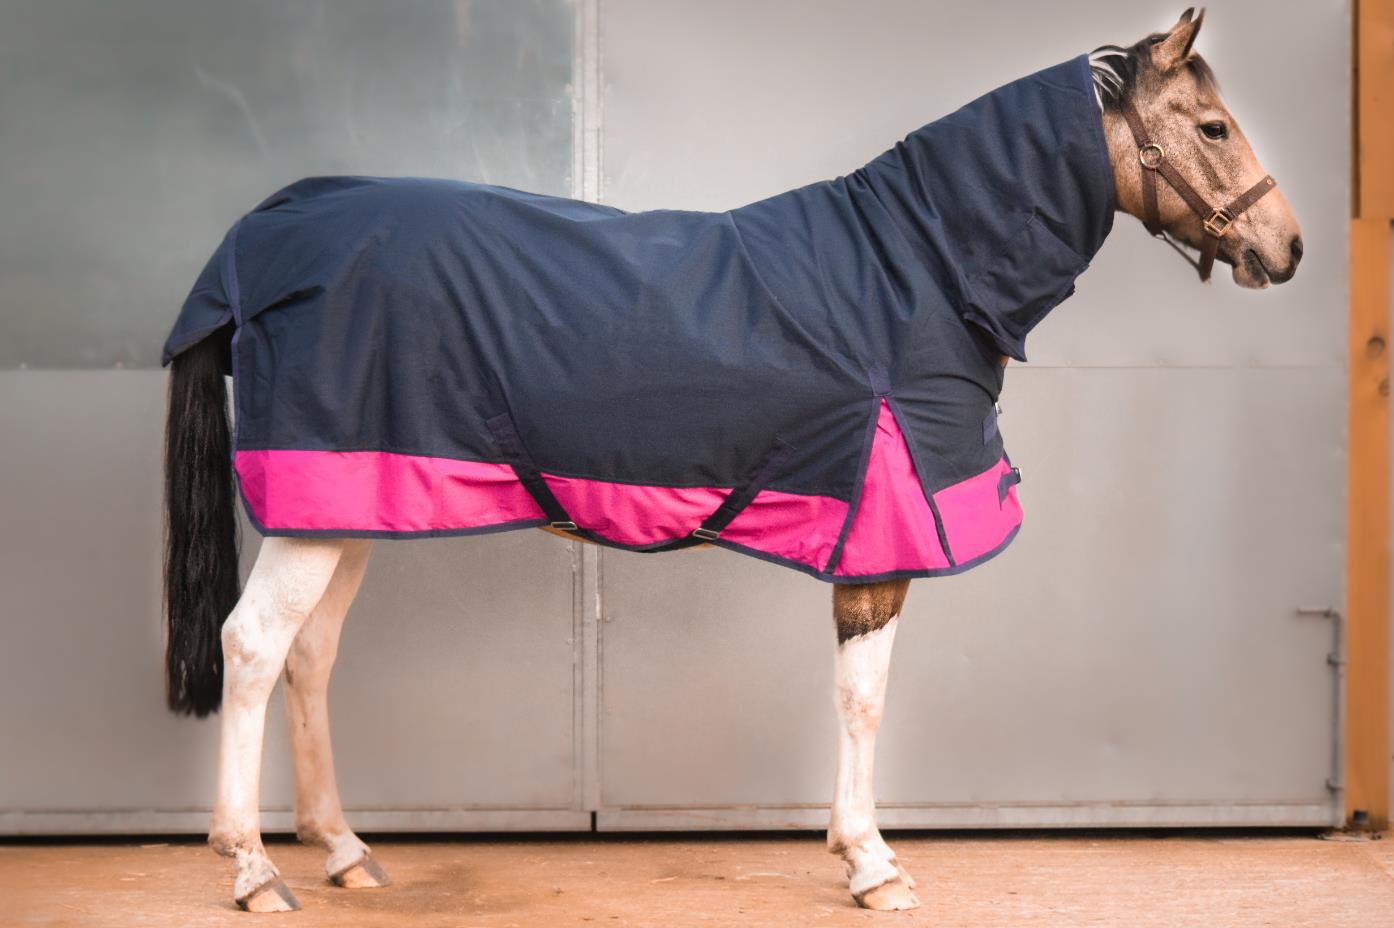 1200D Winter Turnout Horse Rugs 50g Filling COMBO Neck Navy/Raspberry 5'3-6'9 - Tack24